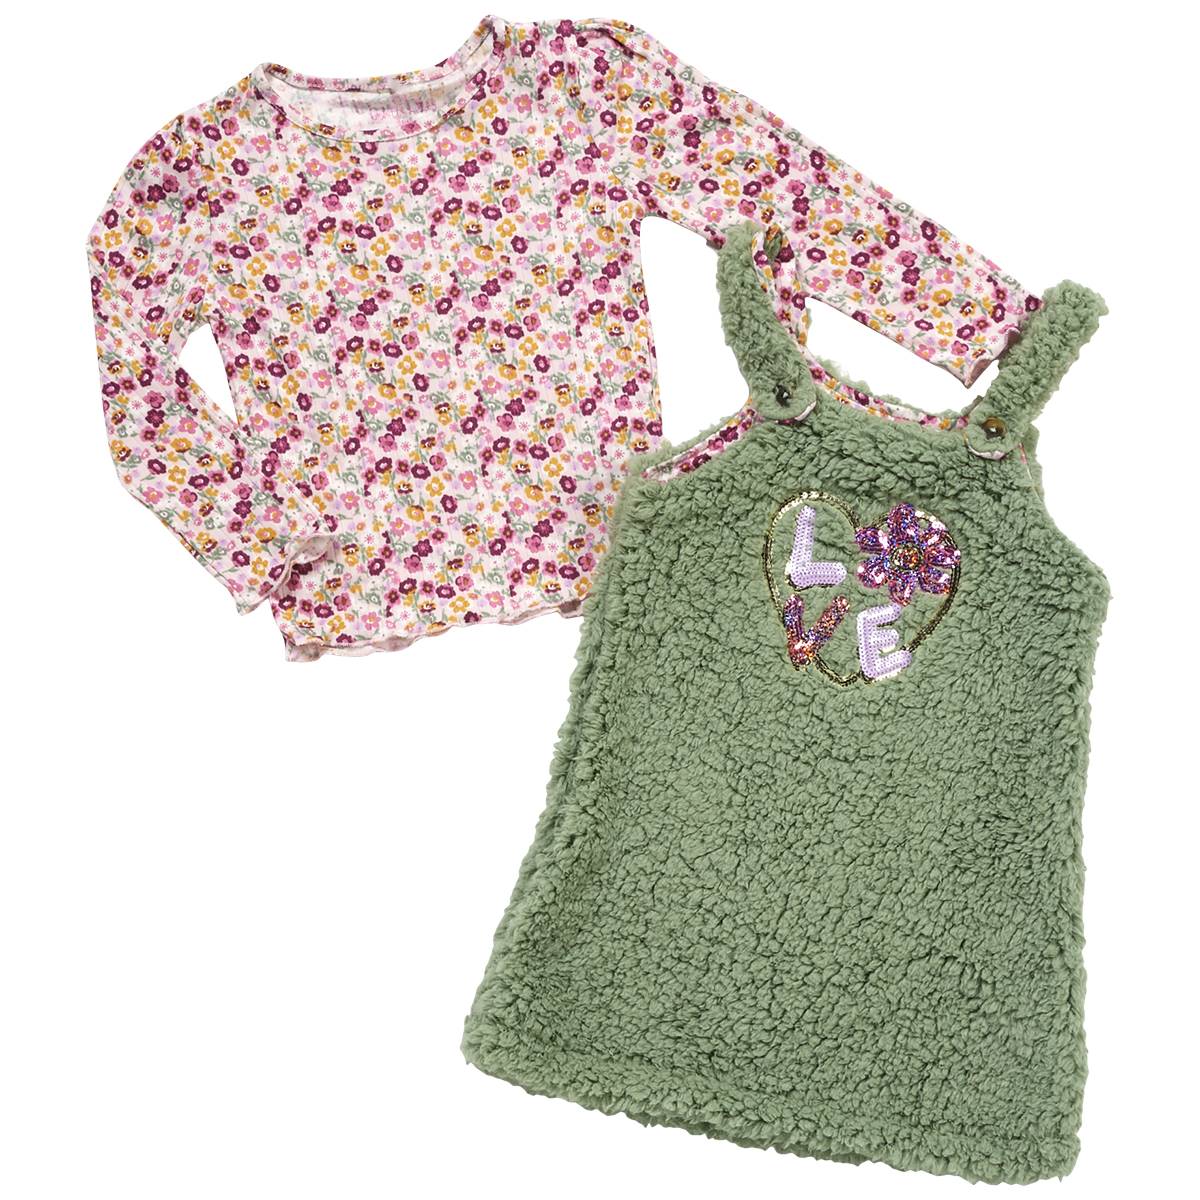 Girls (4-6x) Colette Lilly 2pc. Ditsy Top & Sherpa Jumper